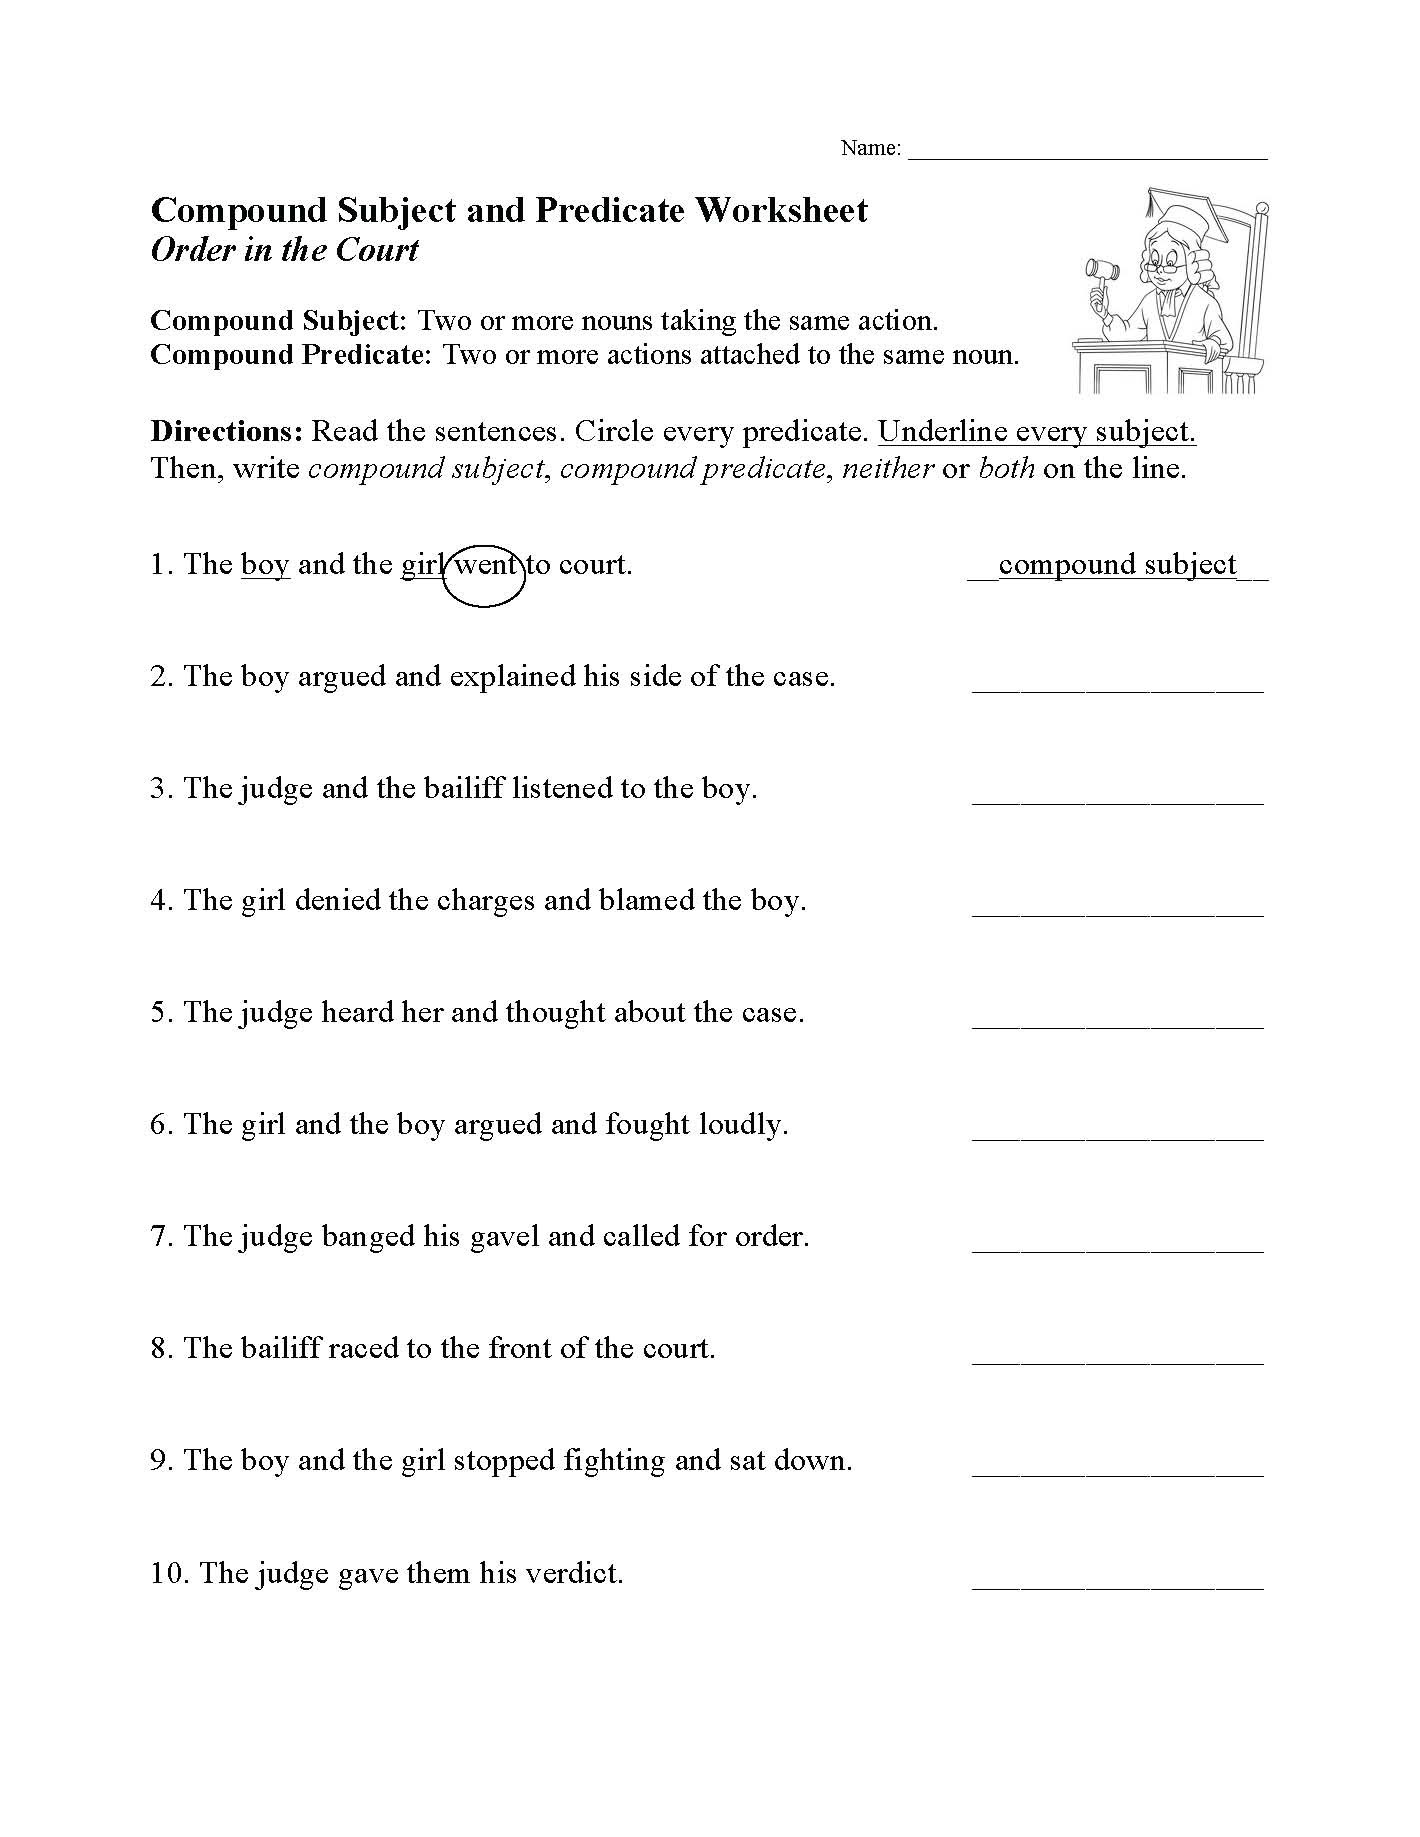 Compound Subject and Predicate Worksheet  Sentence Structure Activity For Subjects And Predicates Worksheet